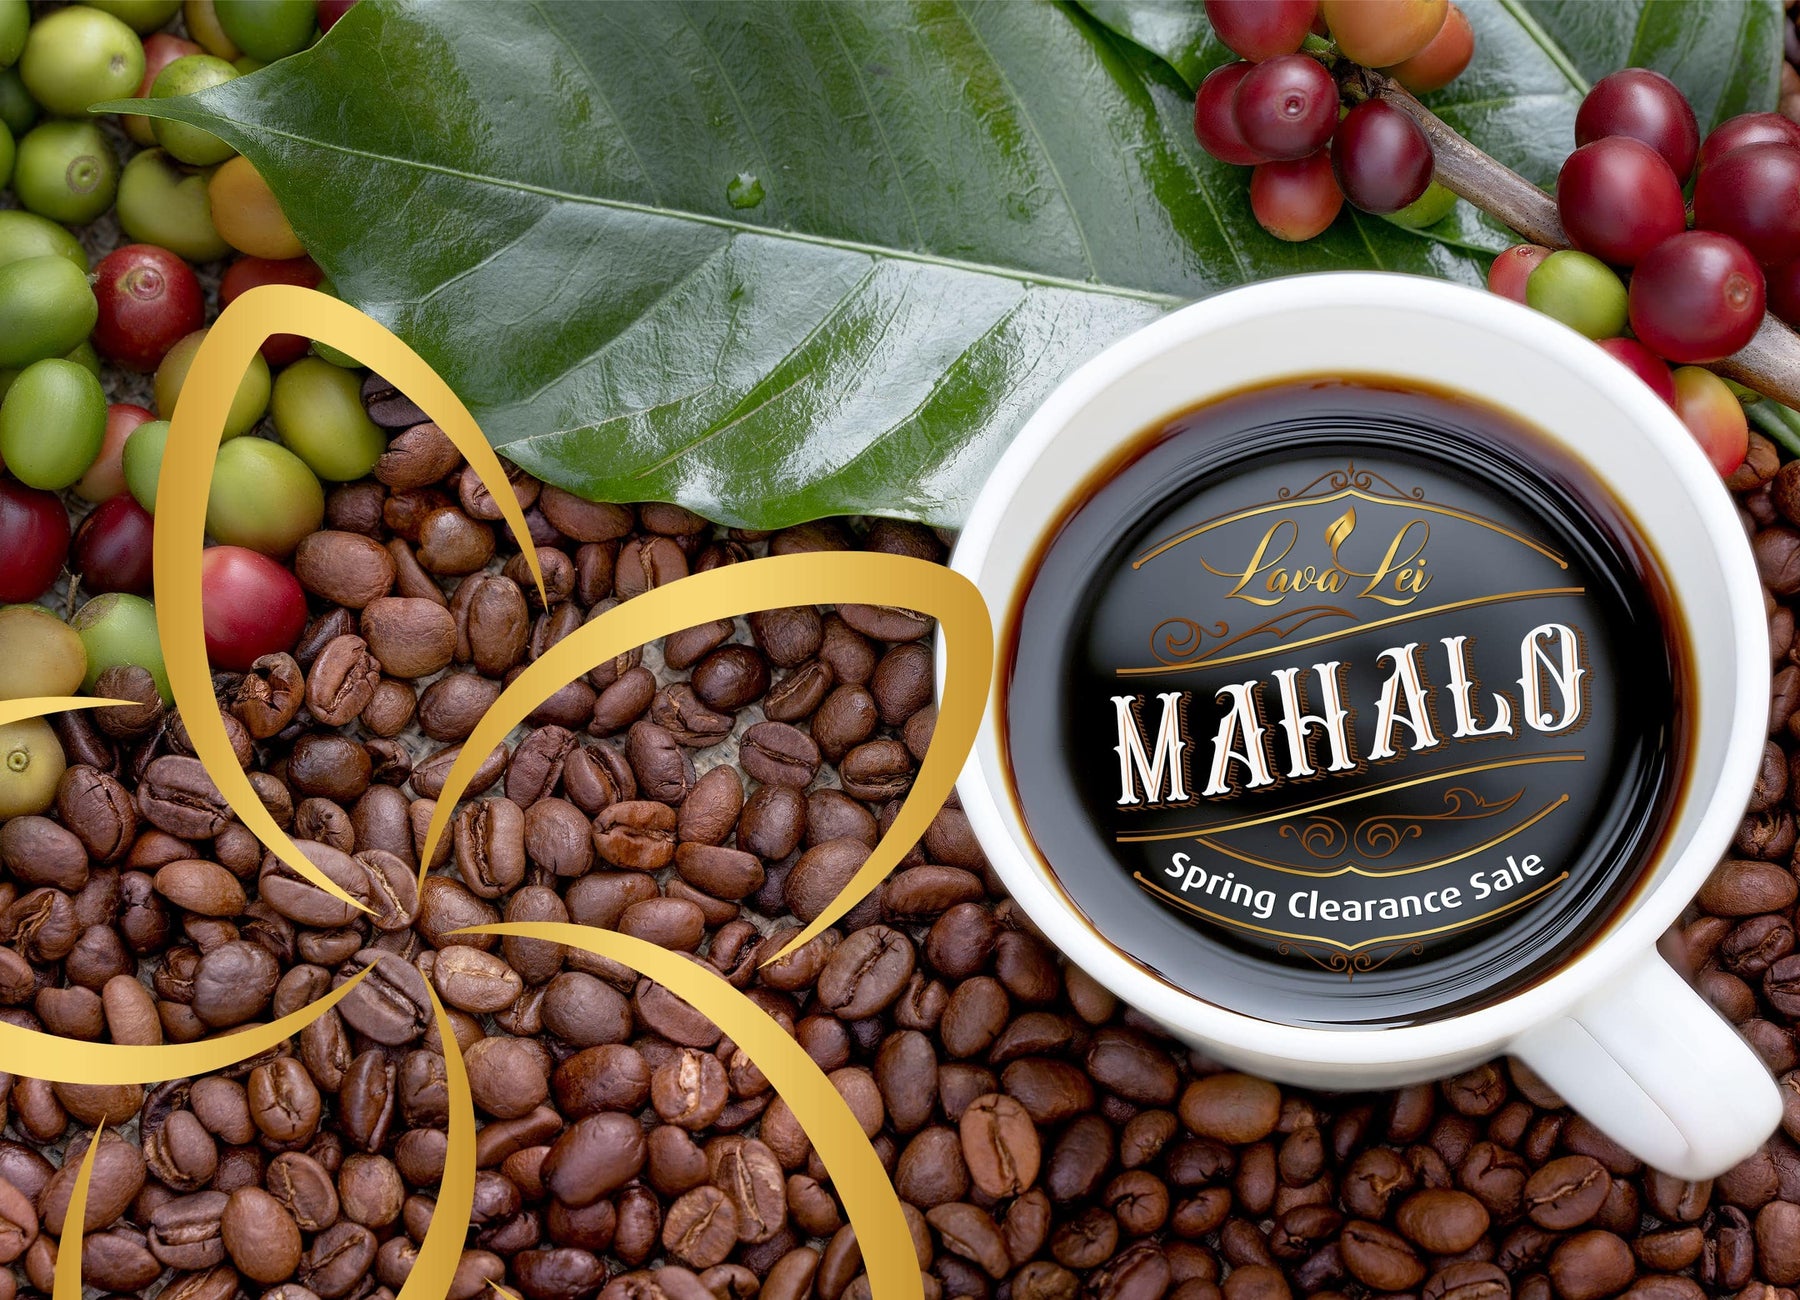 Top view of a coffee cup with text: 'Mahalo, Spring clearance Sale' and 'Lava Lei' on the coffee shadow. Coffee beans in the background